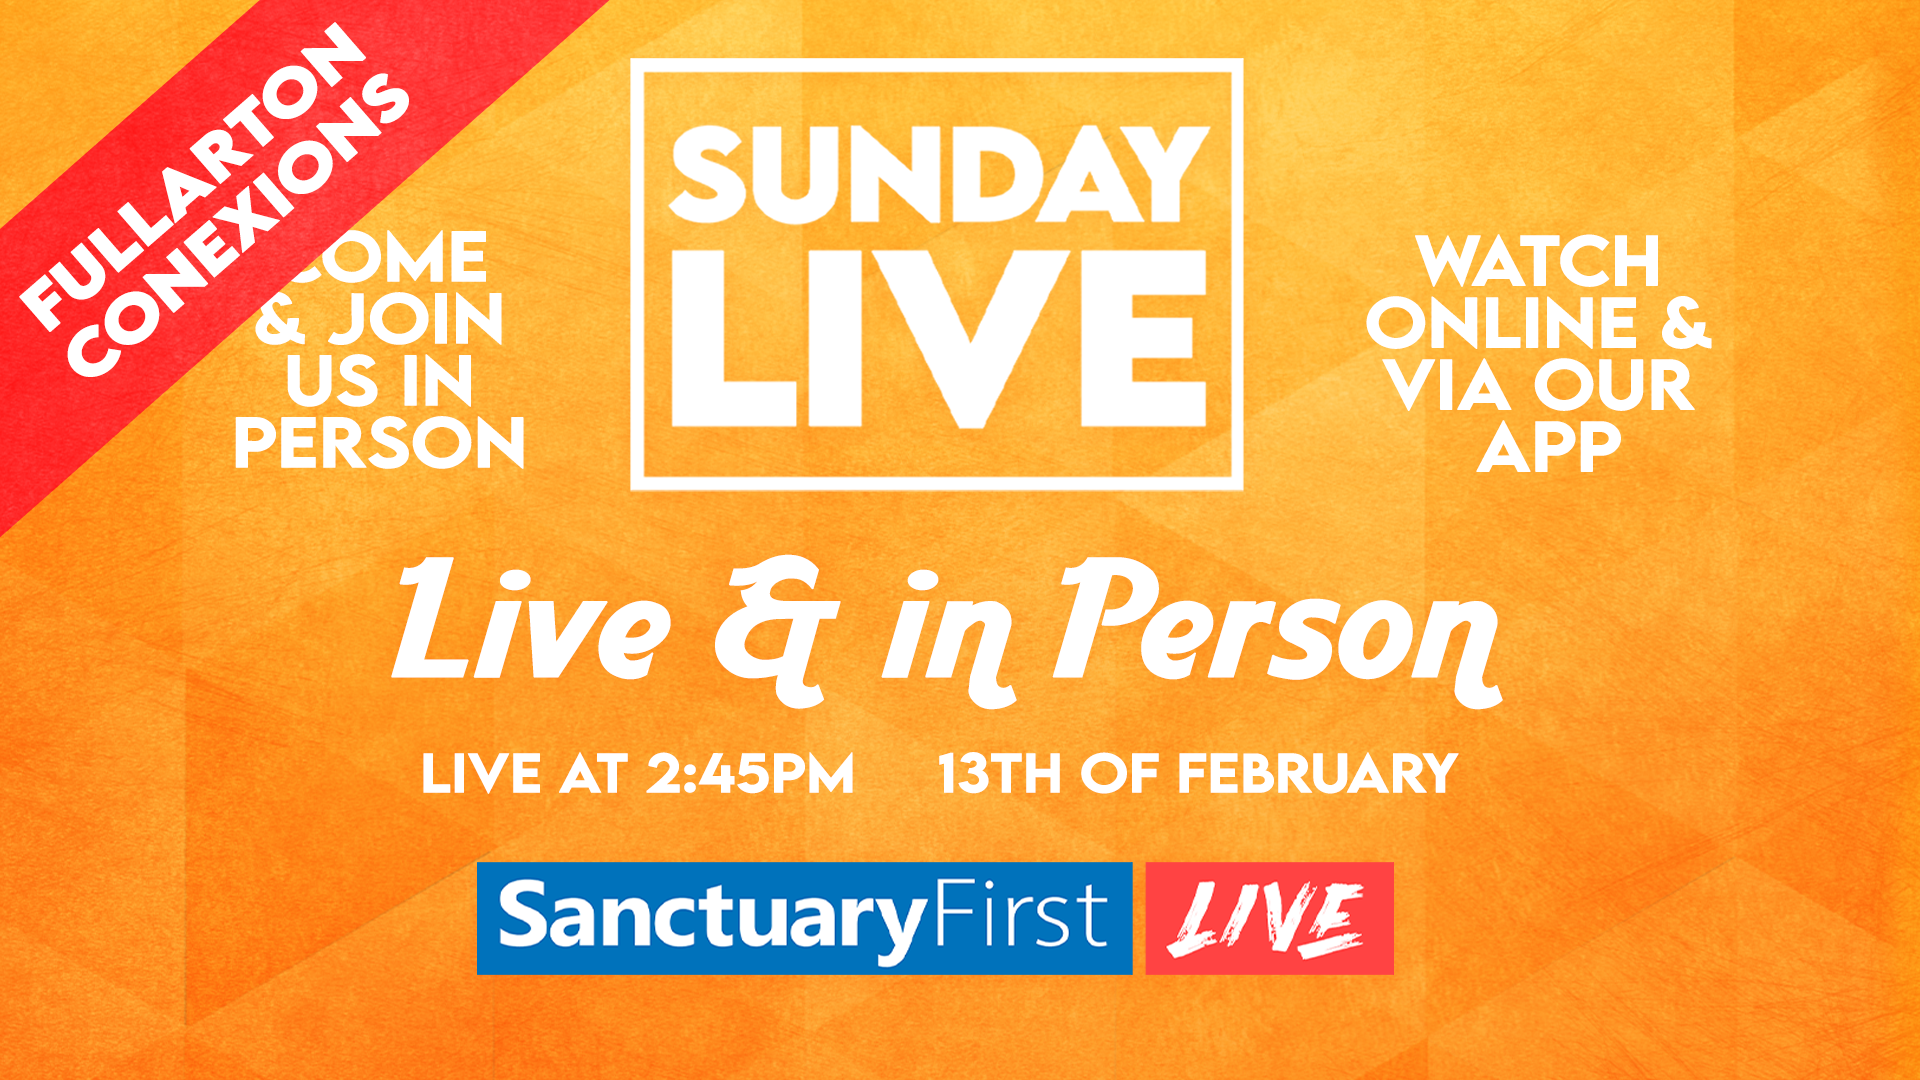 Sunday Live - Live & In Person